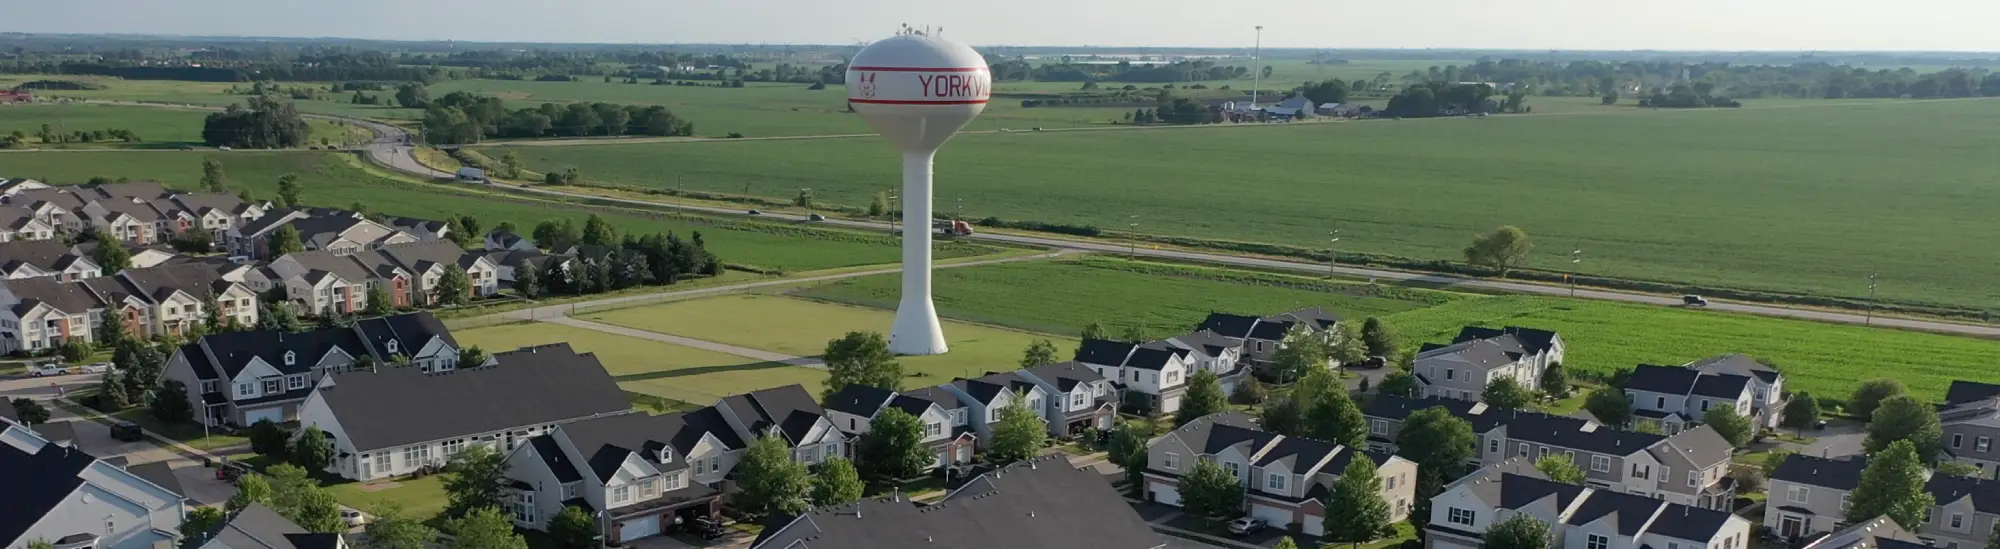 Yorkville, Illinois bristol bay community and water tower